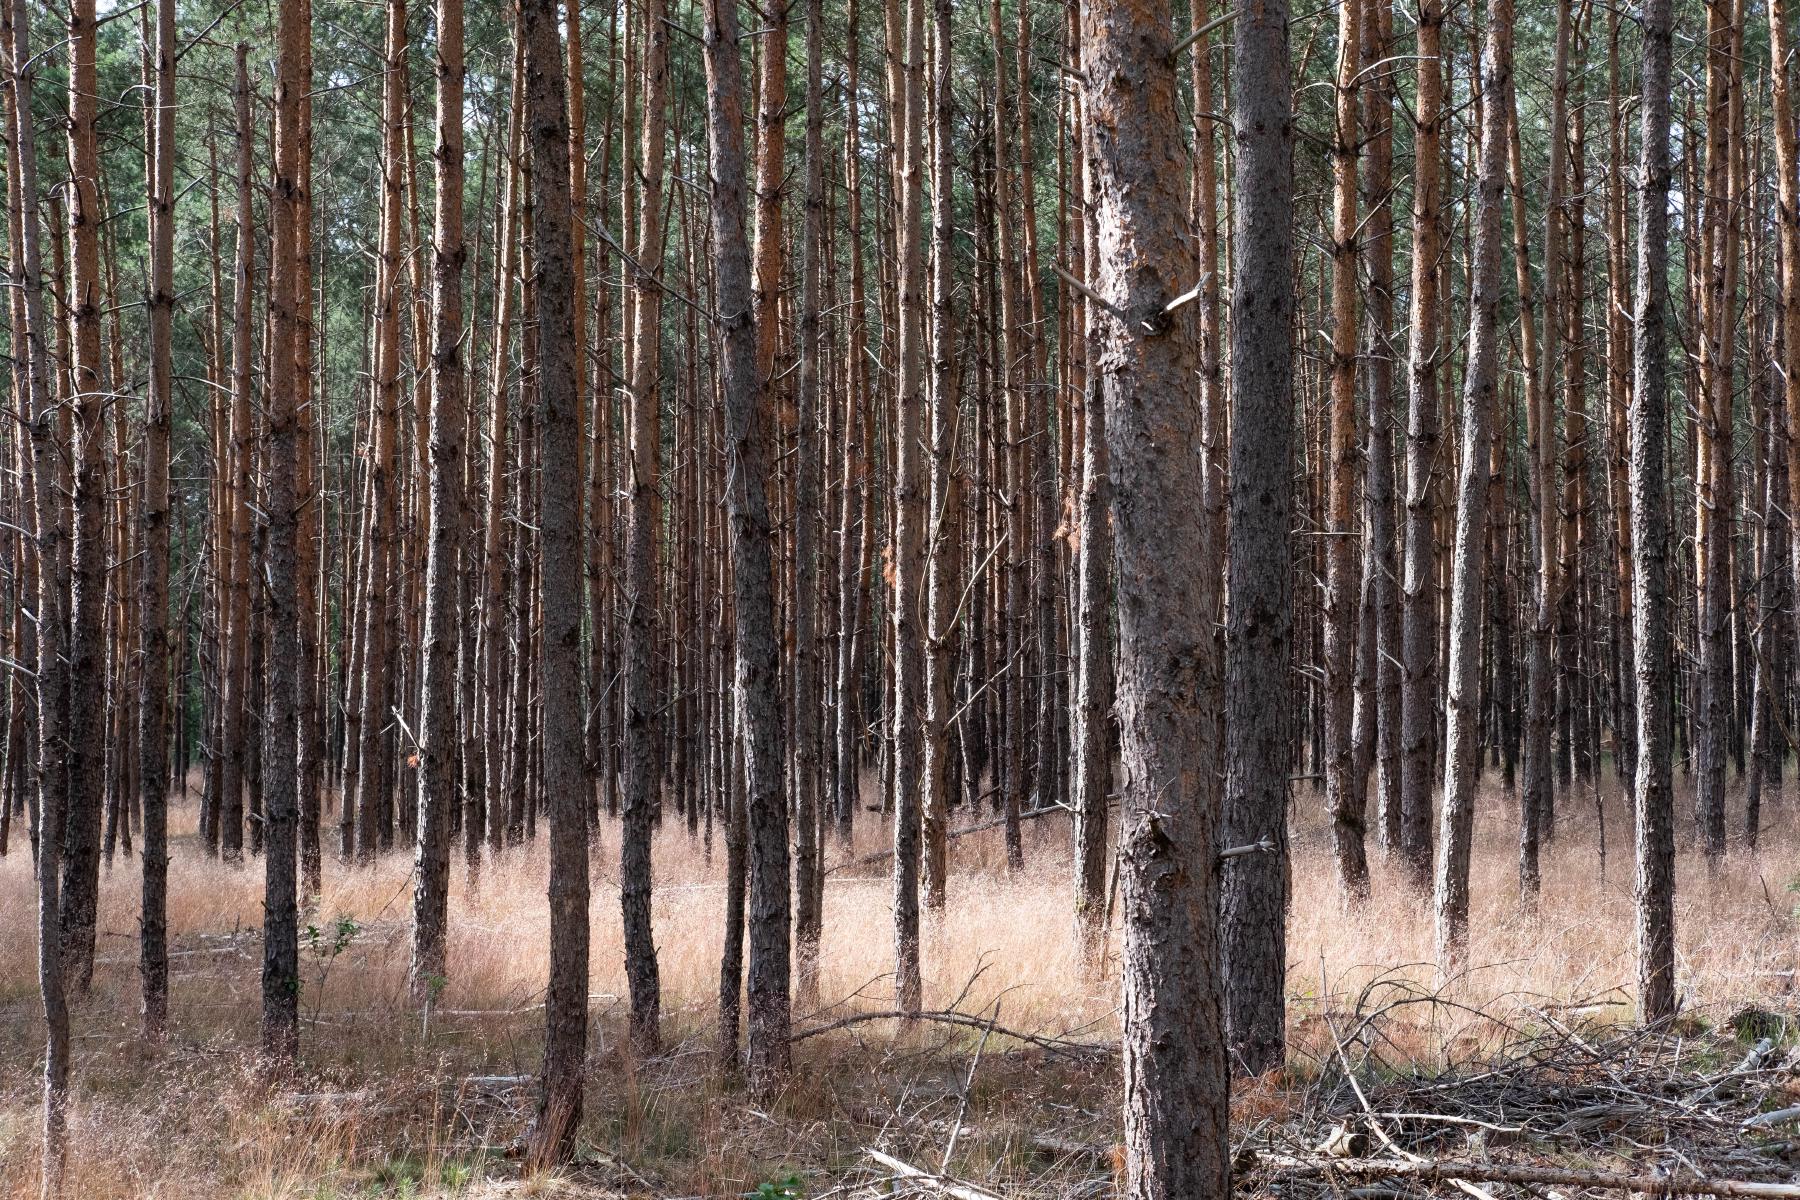 a dense forest of pine trees and dried grass